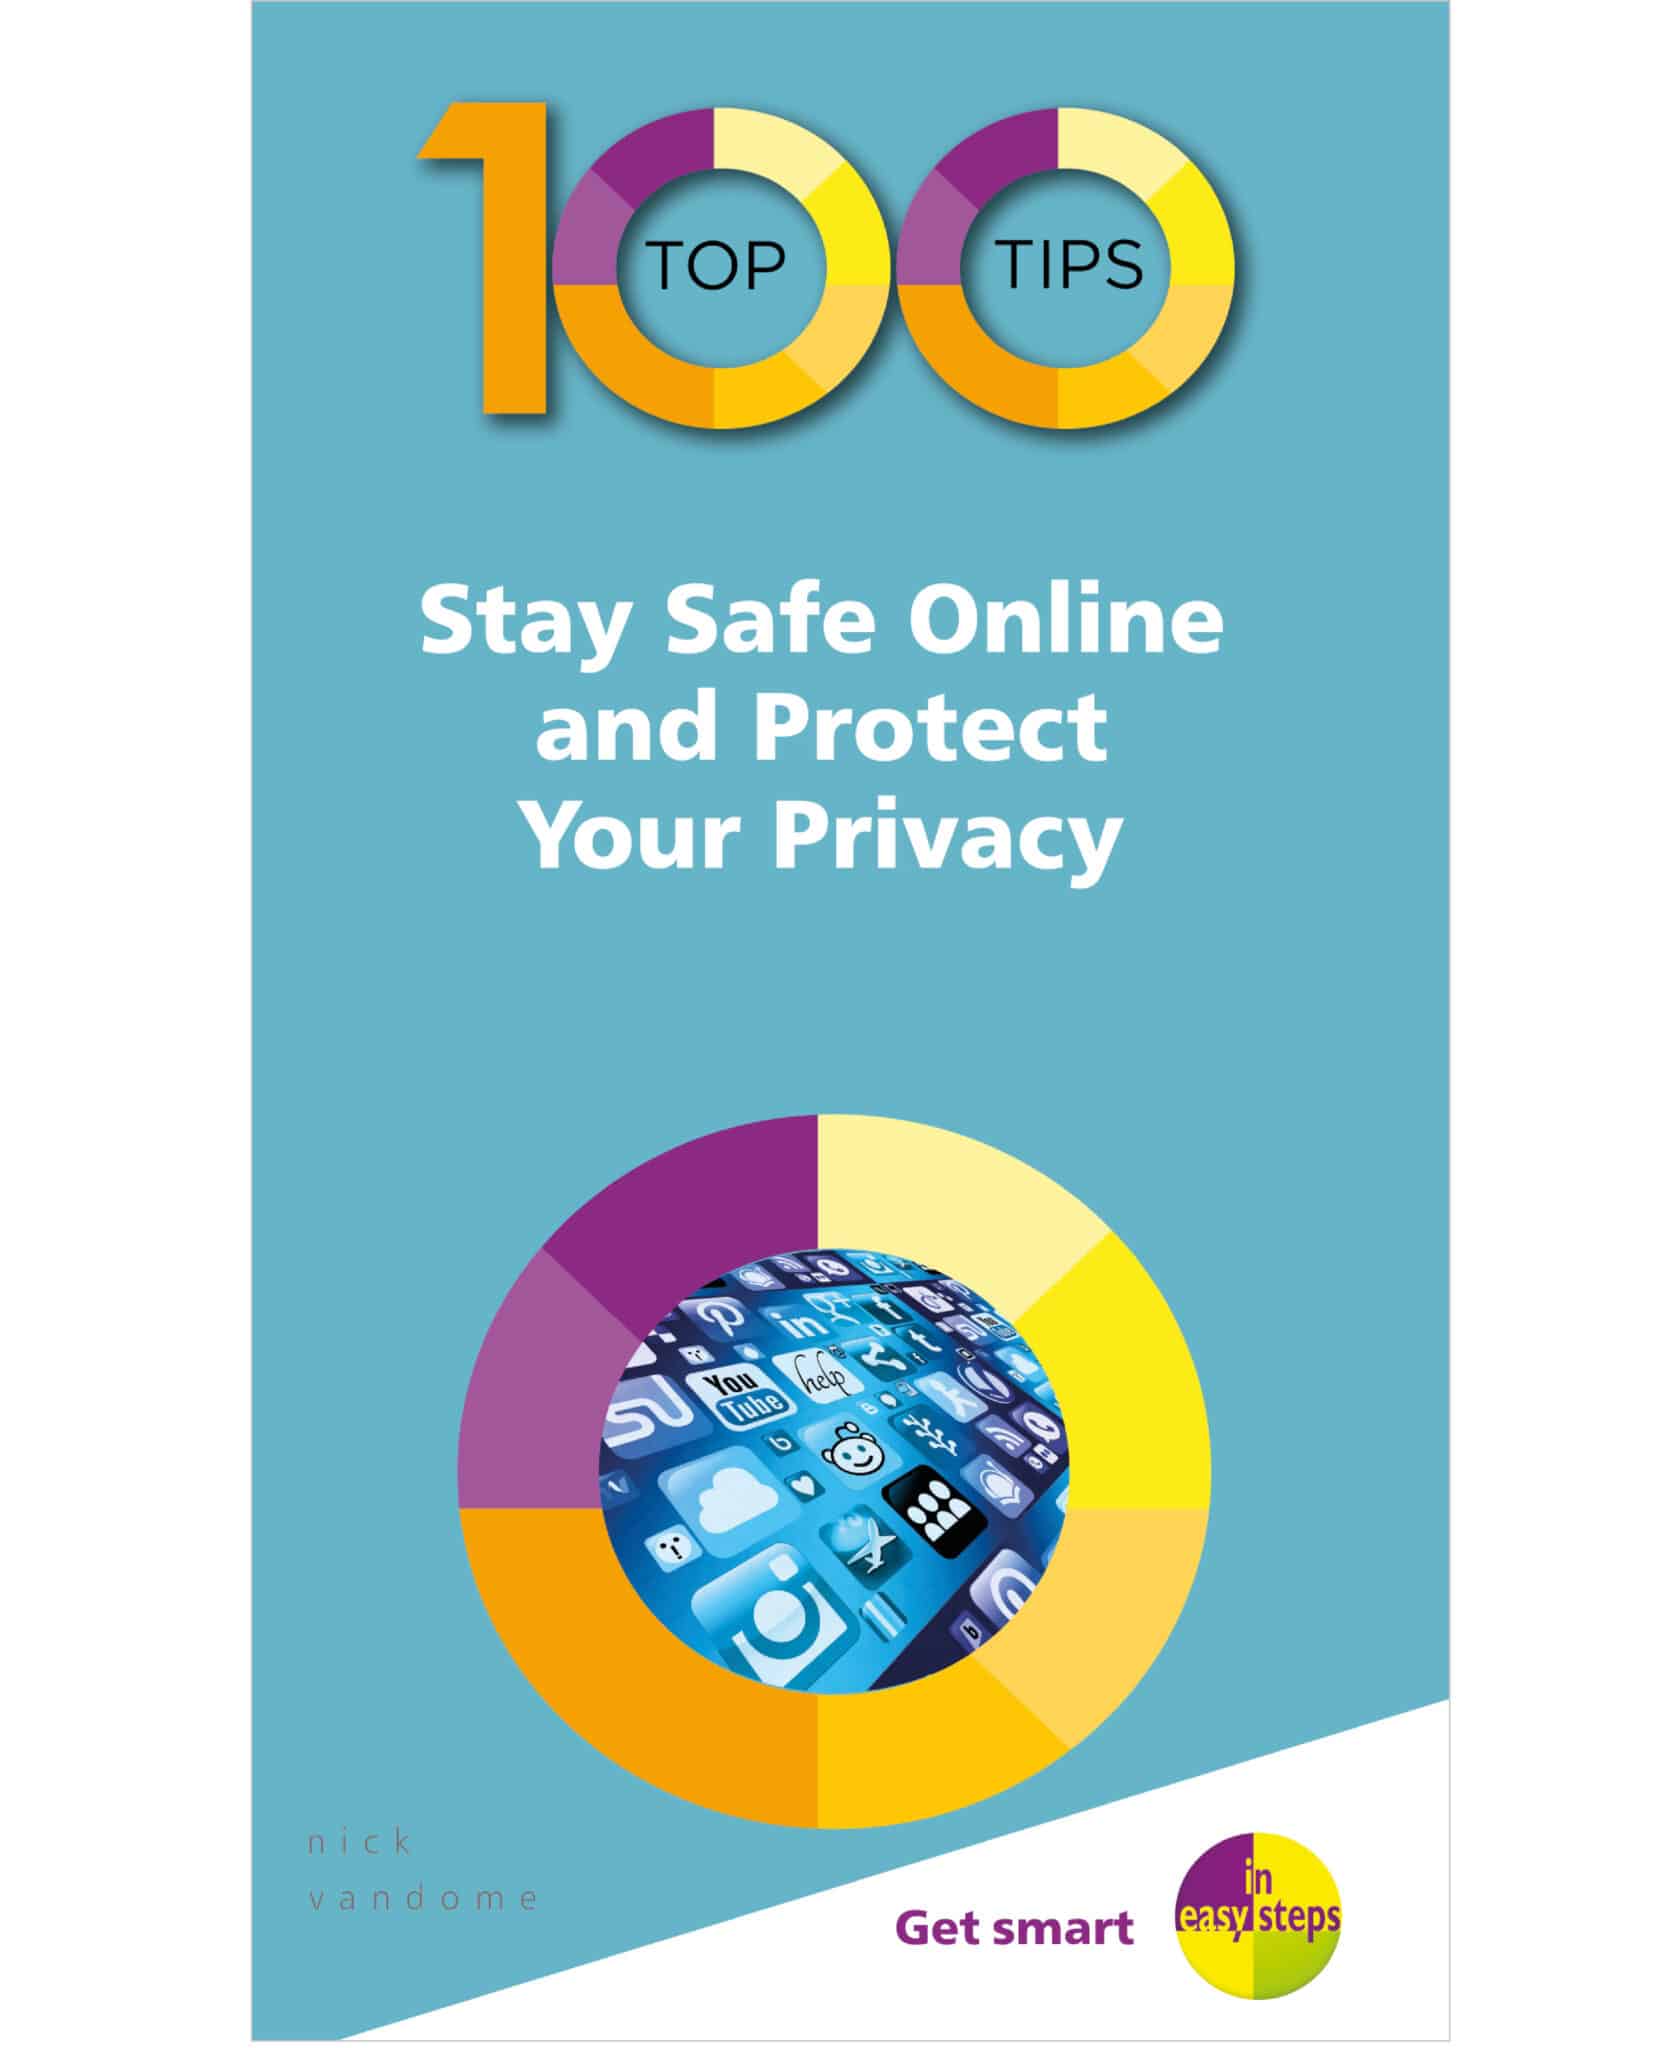 100 Top Tips - Stay Safe Online and Protect Your Privacy_cover